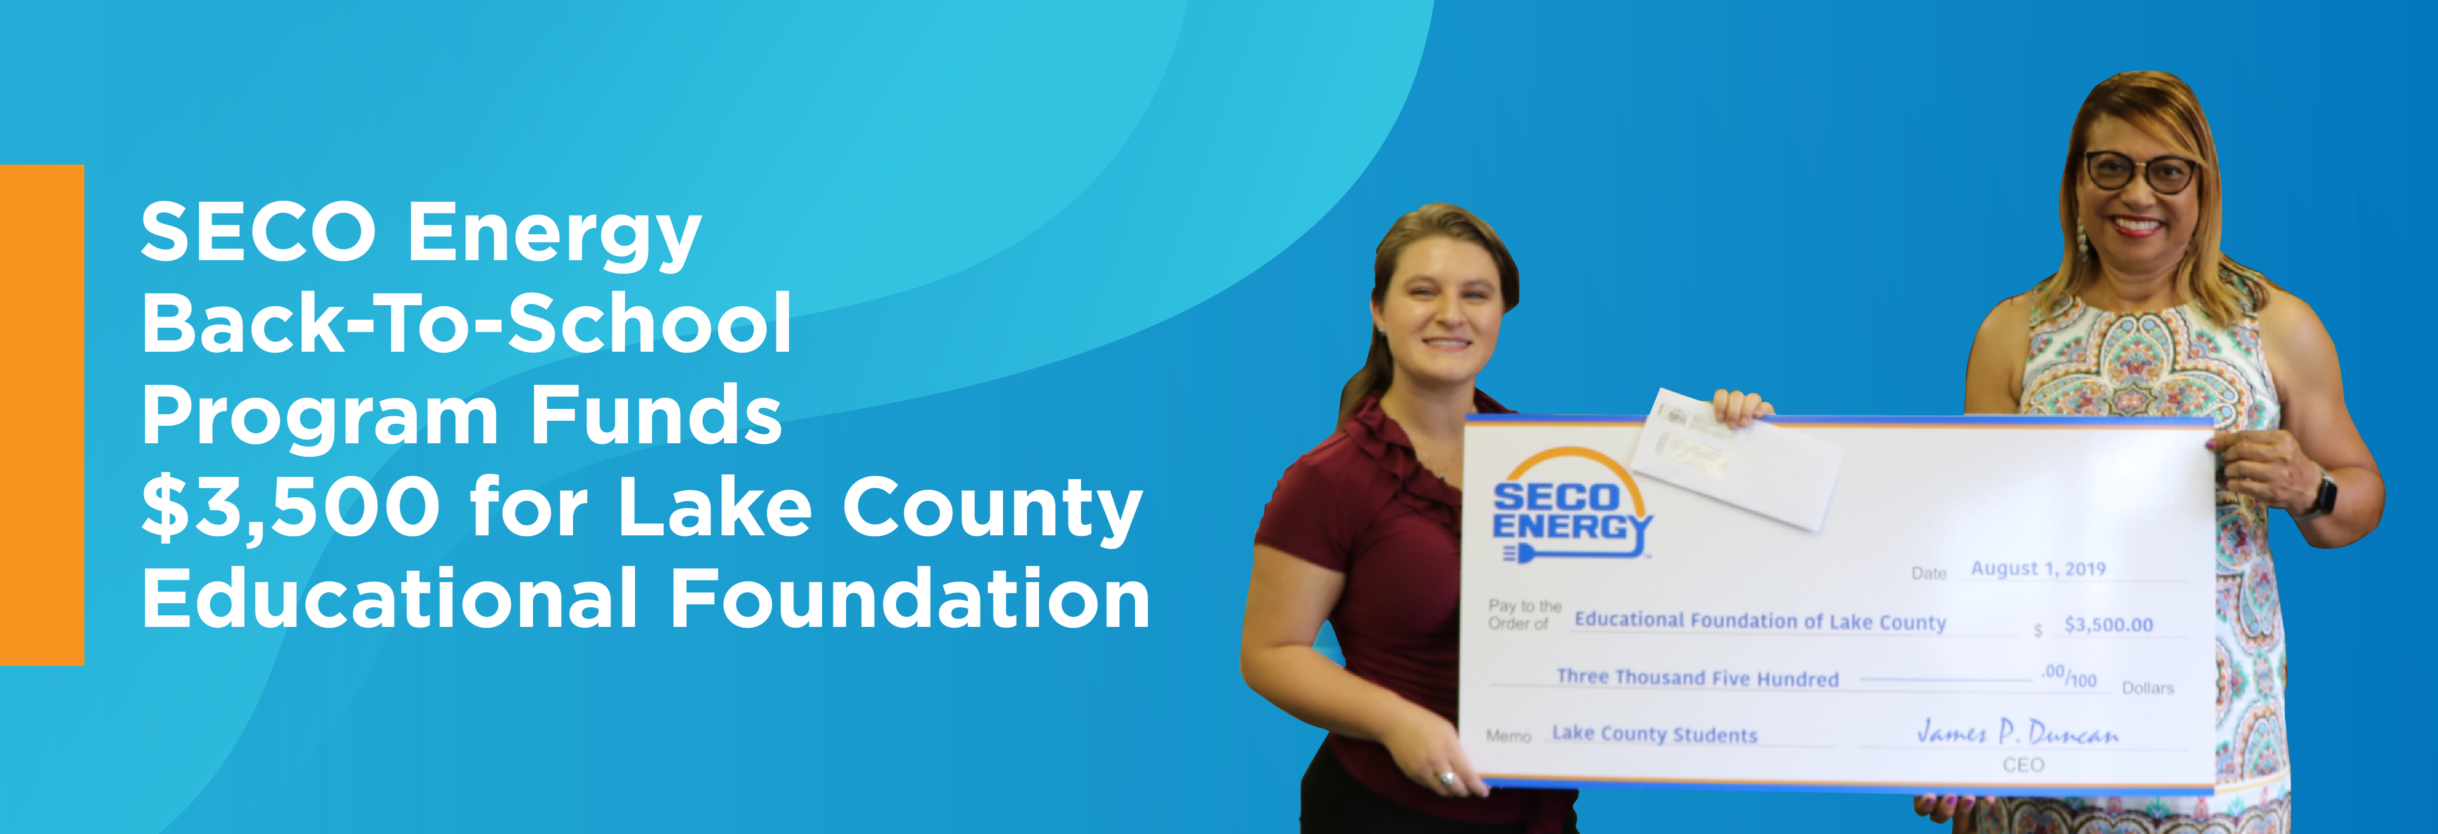 SECO Energy Back-To-School Program Funds $3,500 for Lake County Educational Foundation